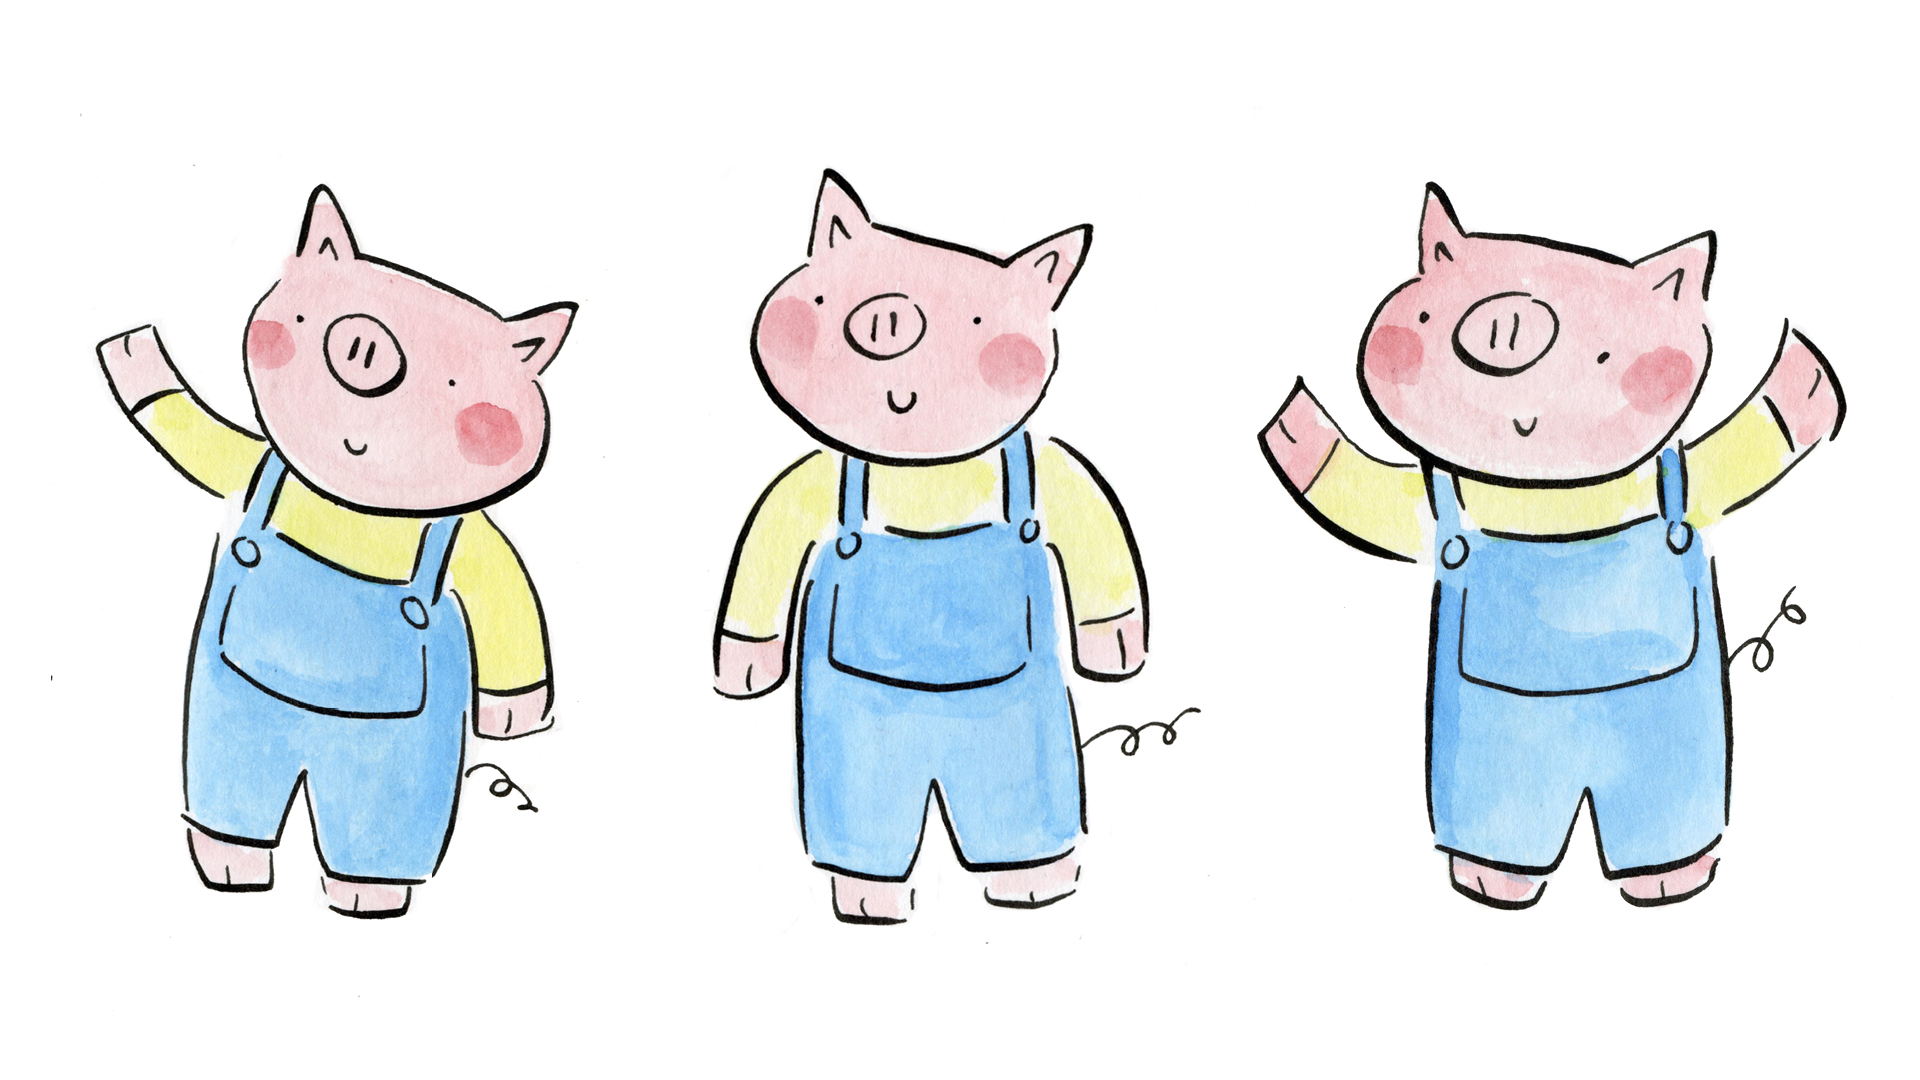 Dirty Beasts & The Three Little Pigs